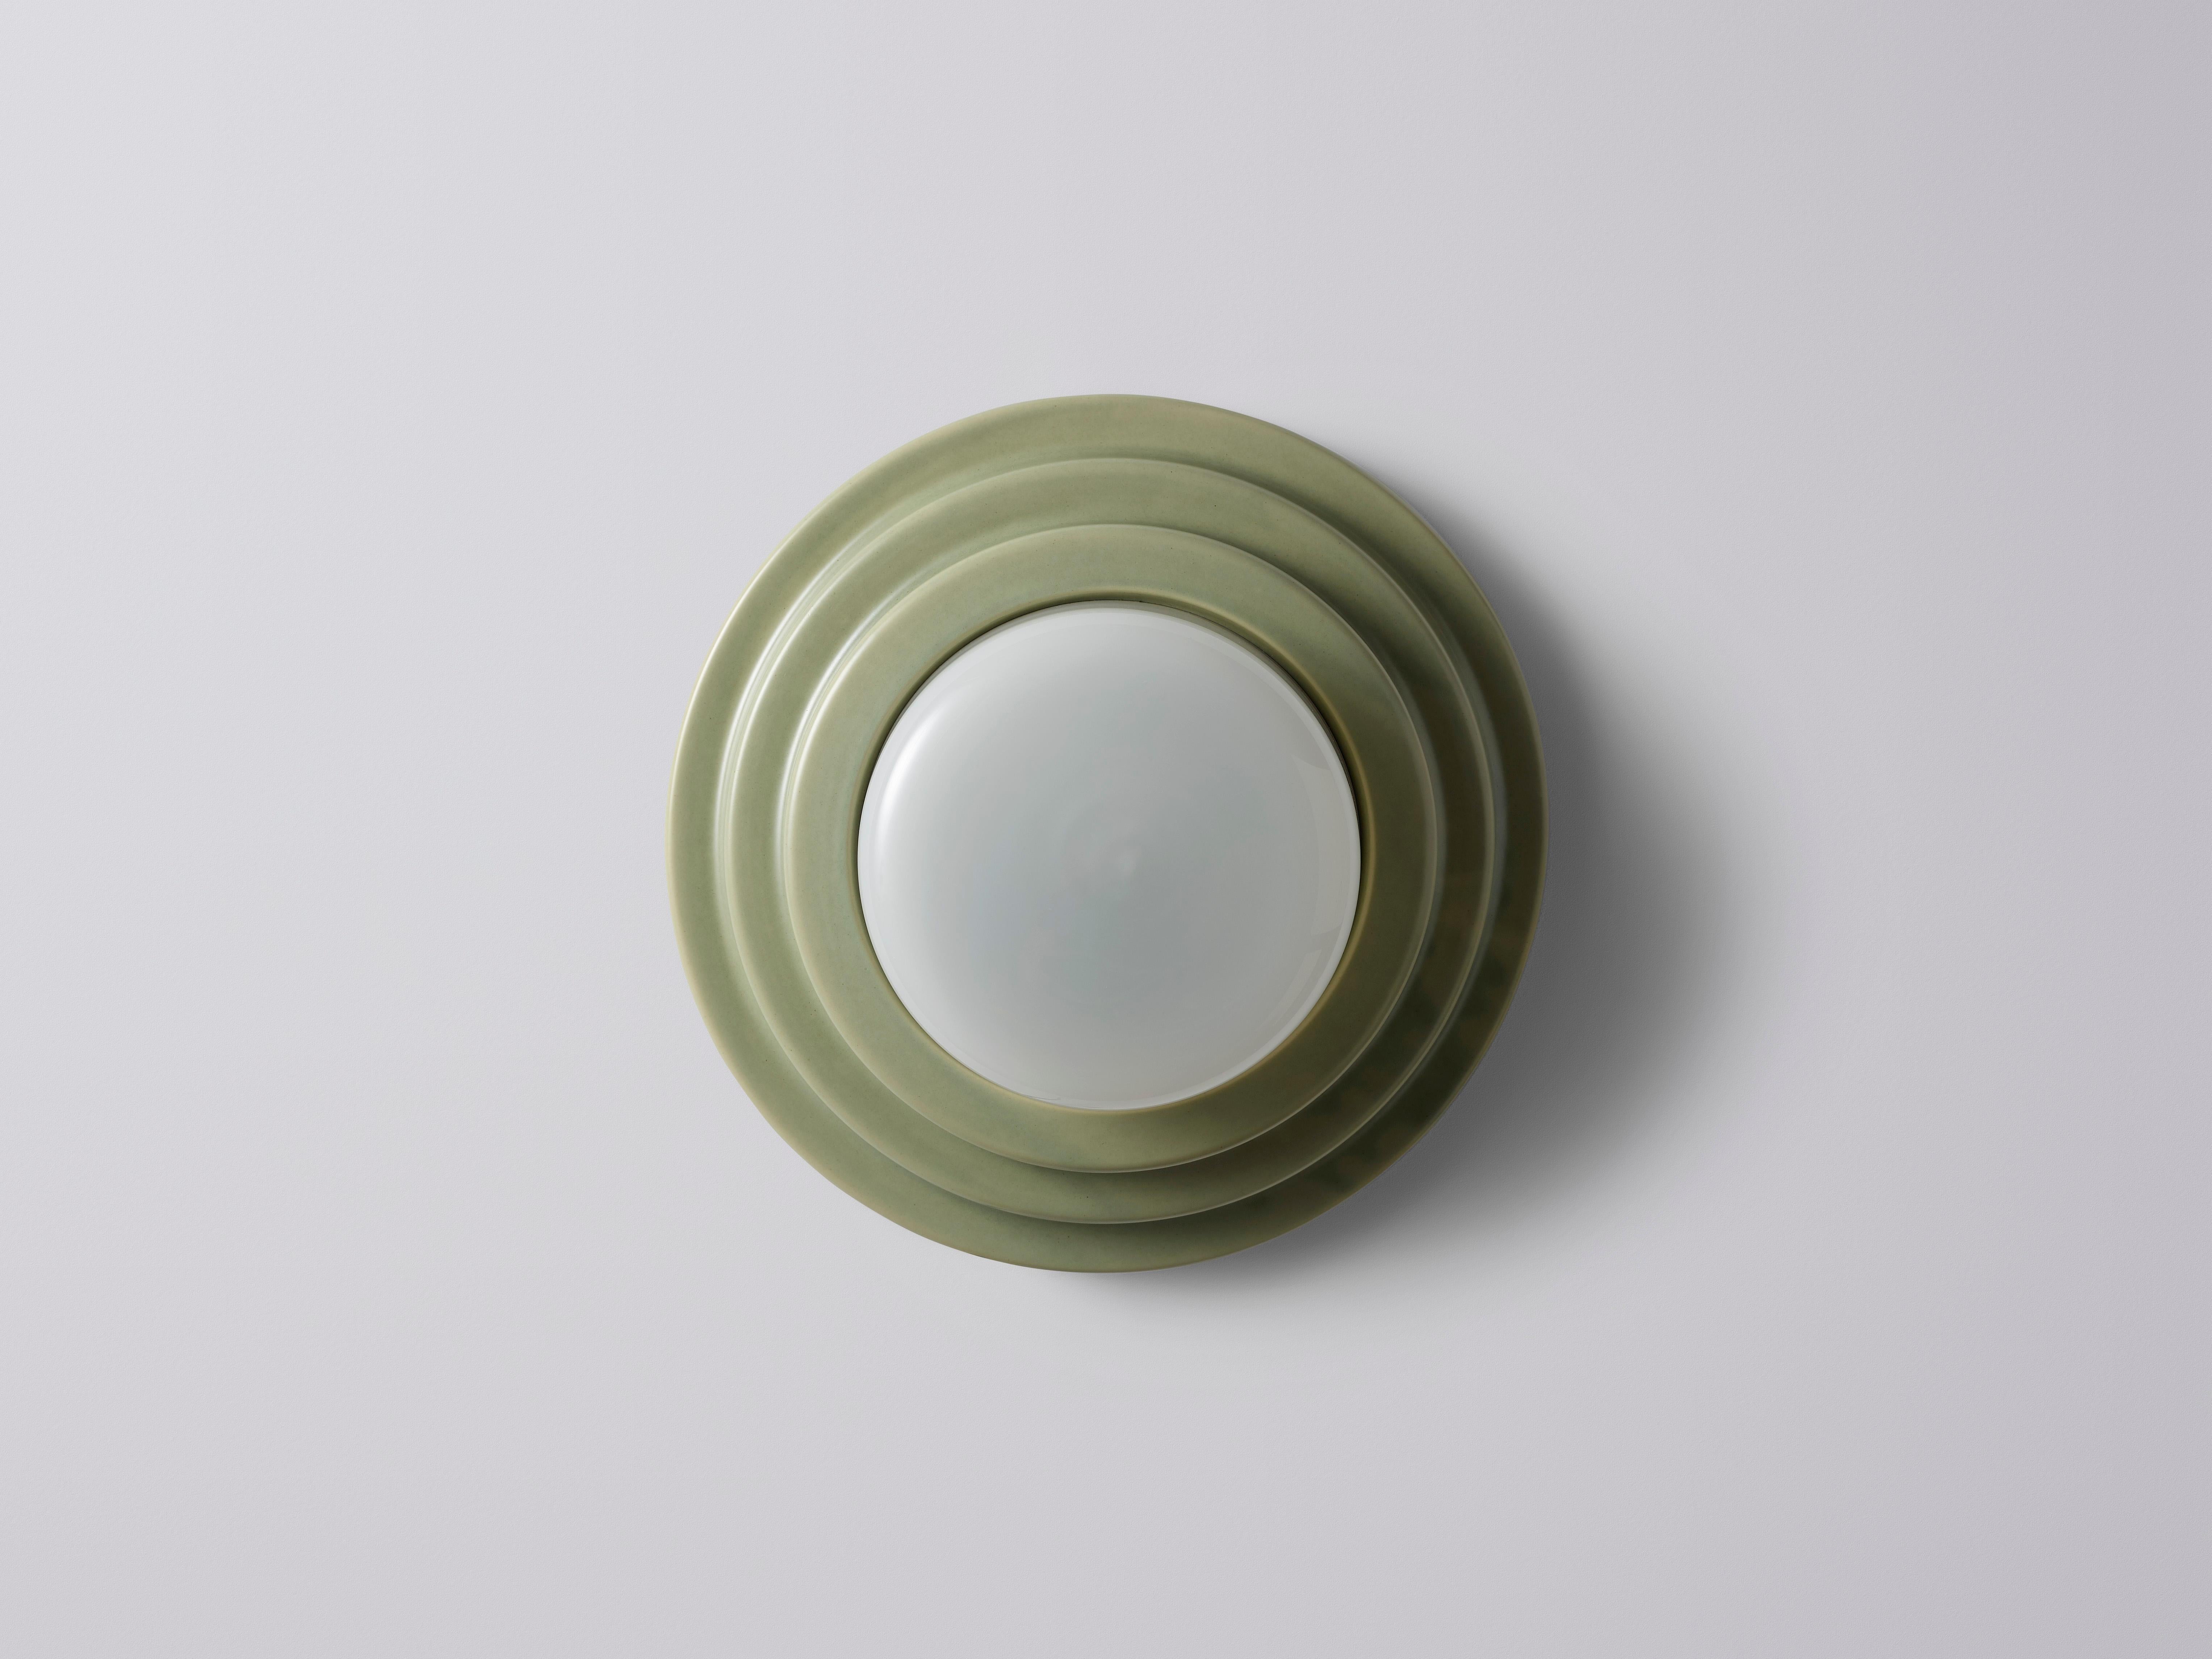 Large Green Honey Wall Sconce by Coco Flip
Dimensions: D 30 x W 30 x H 12 cm
Materials: Slip cast ceramic stoneware with blown glass. 
Weight: 4kg

Standard fixtures included
1 x ceramic G9 lamp holder
1 x dimmable 3.5W 3000K (warm white)
G9 LED